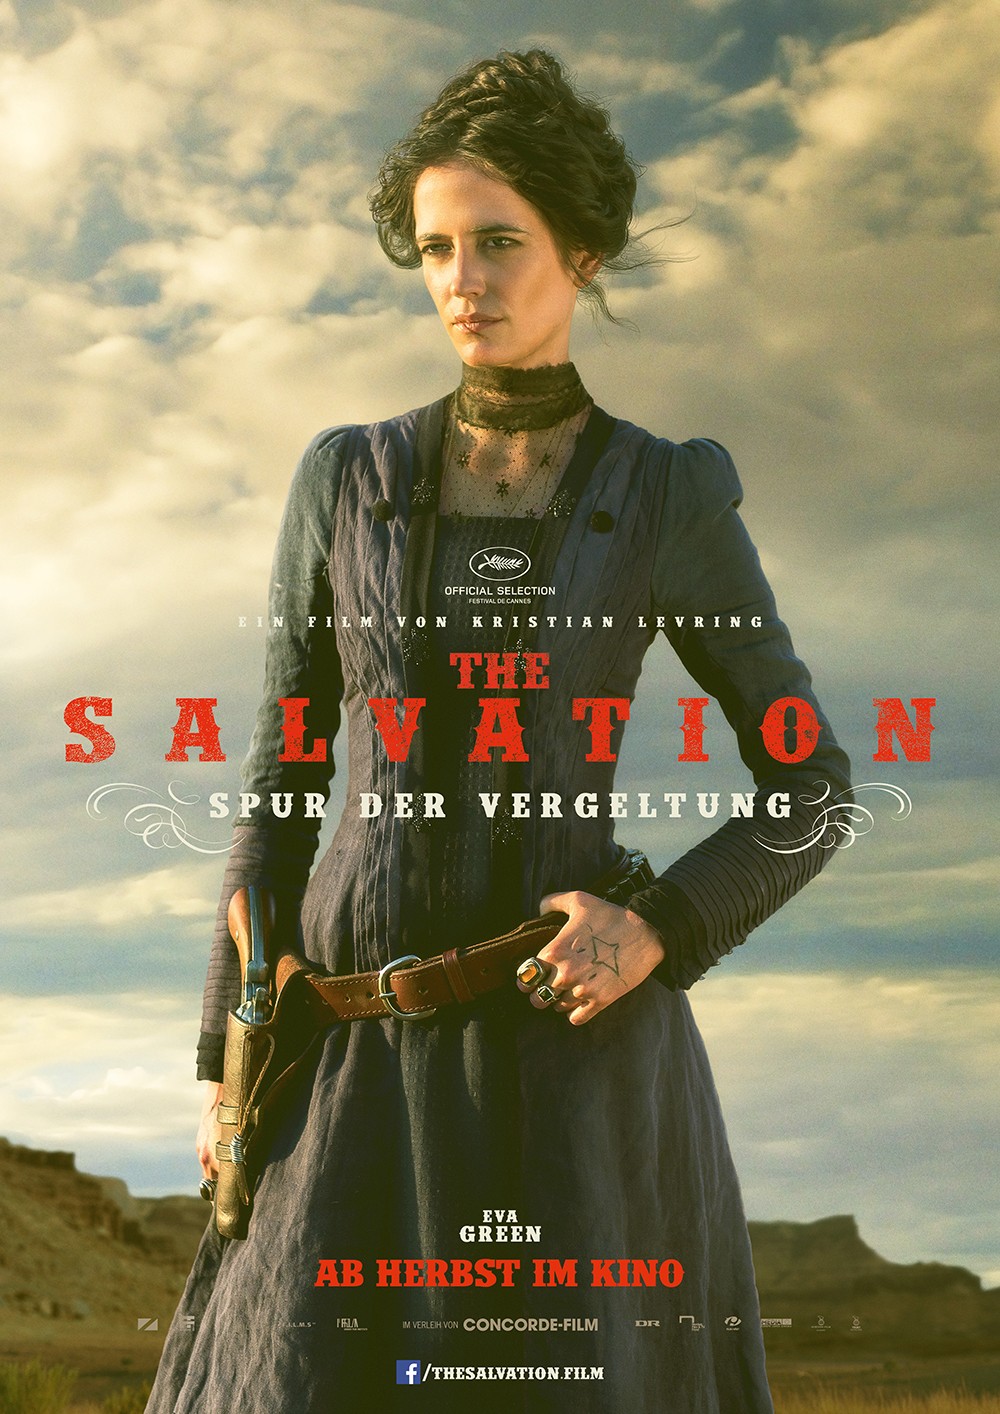 "The Salvation" posters